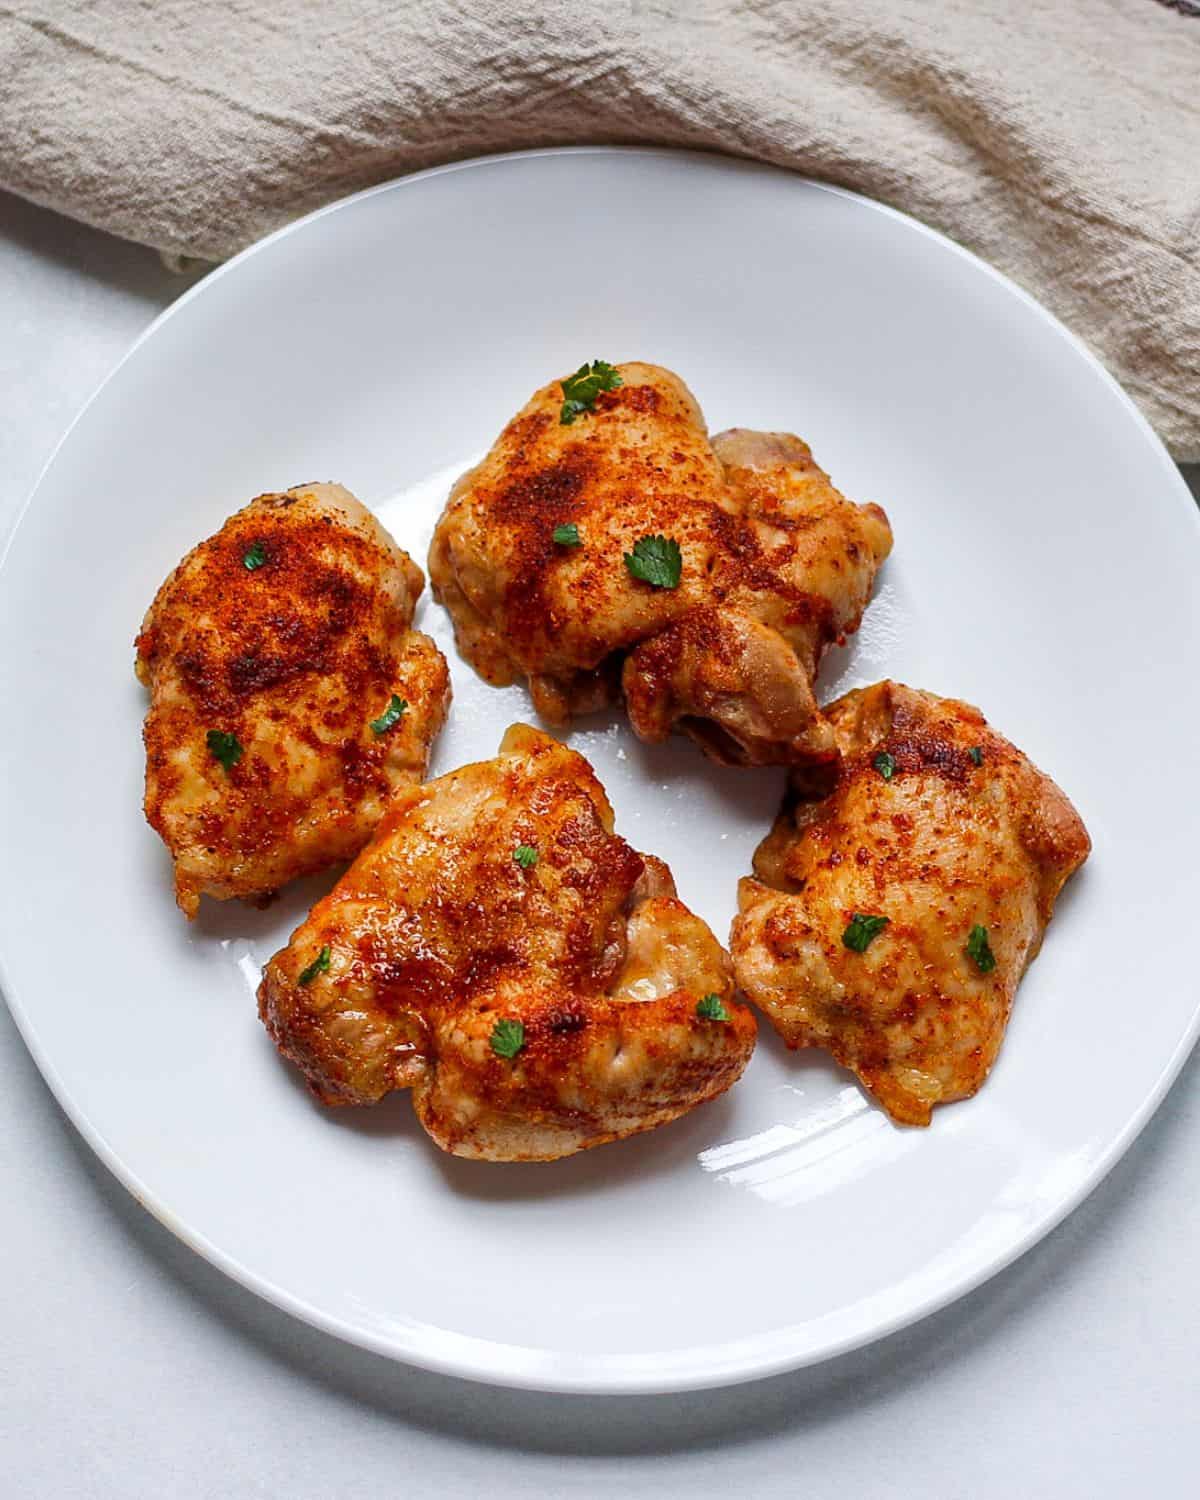 Four cooked boneless skinless chicken thighs in a white plate. The meat is garnished with small pieces of green parsley on top.